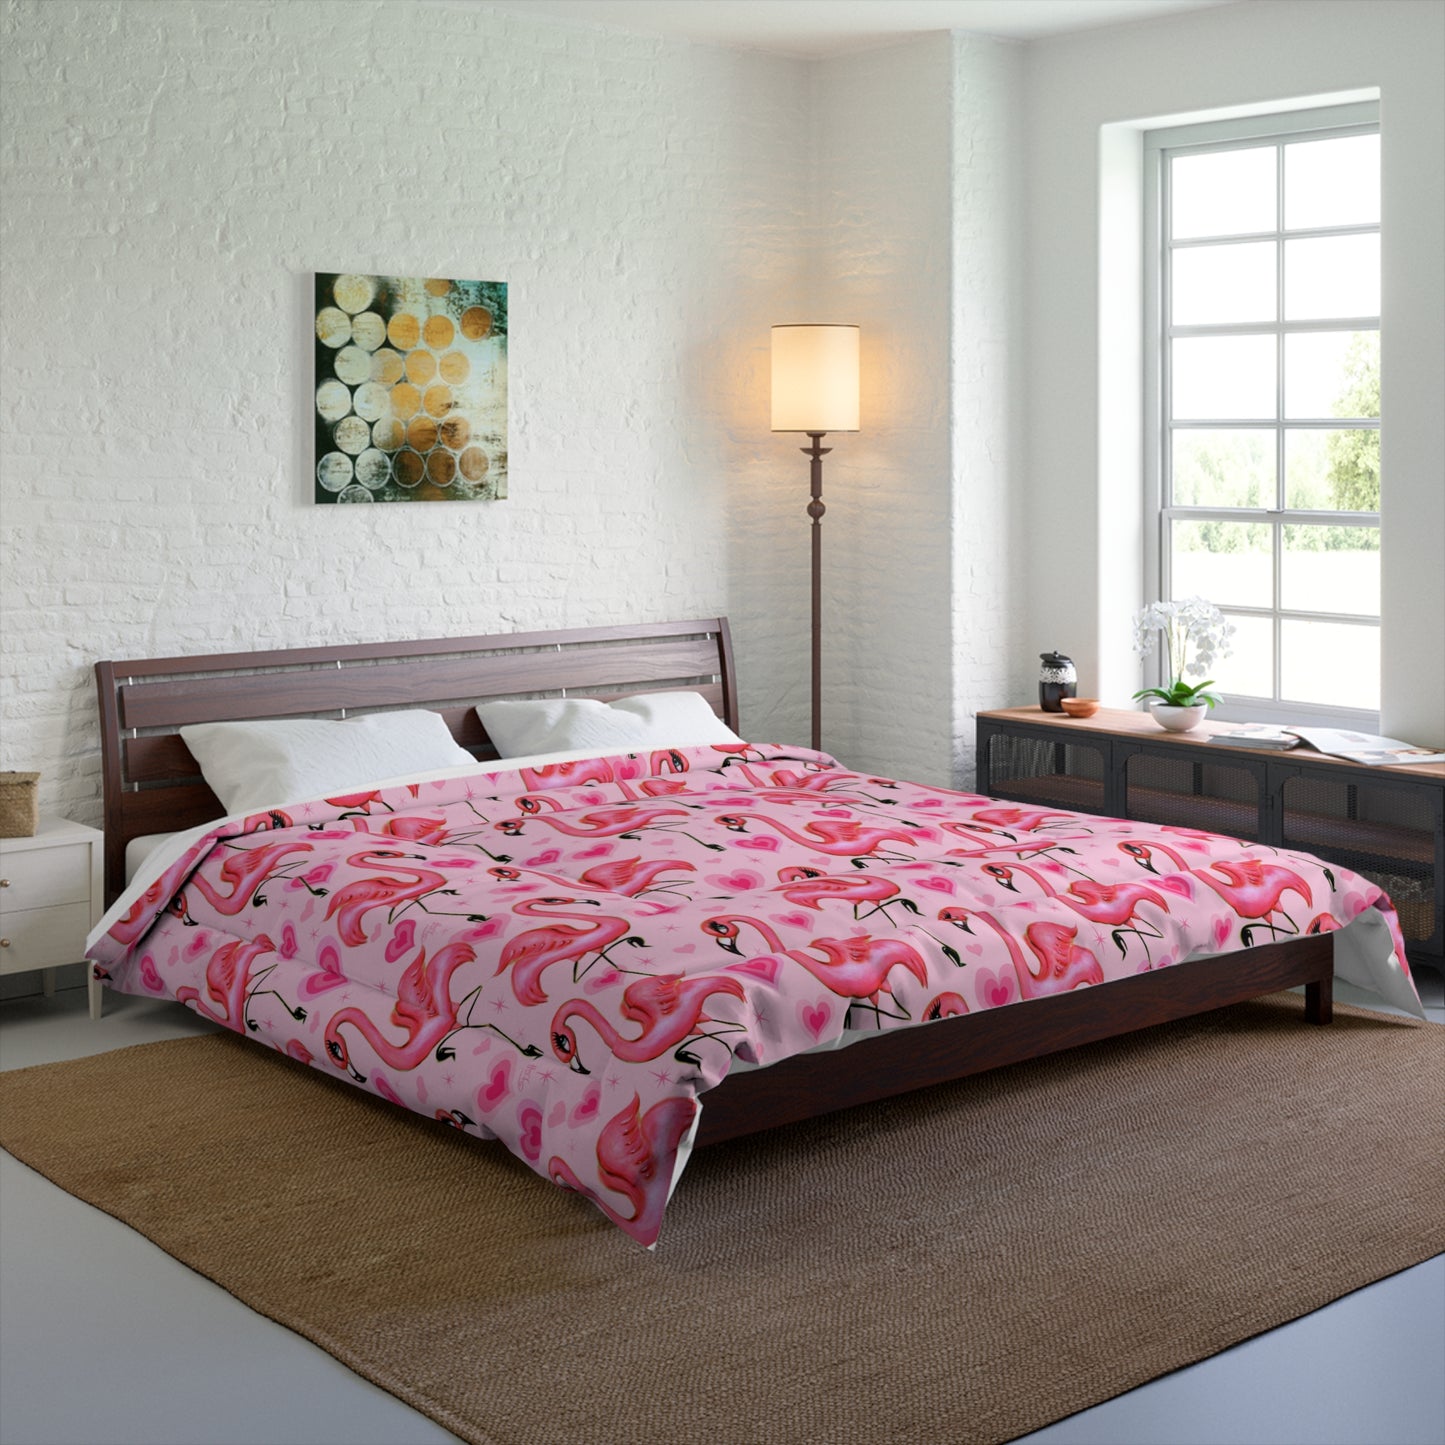 Flamingos and Hearts Pink  • Comforter